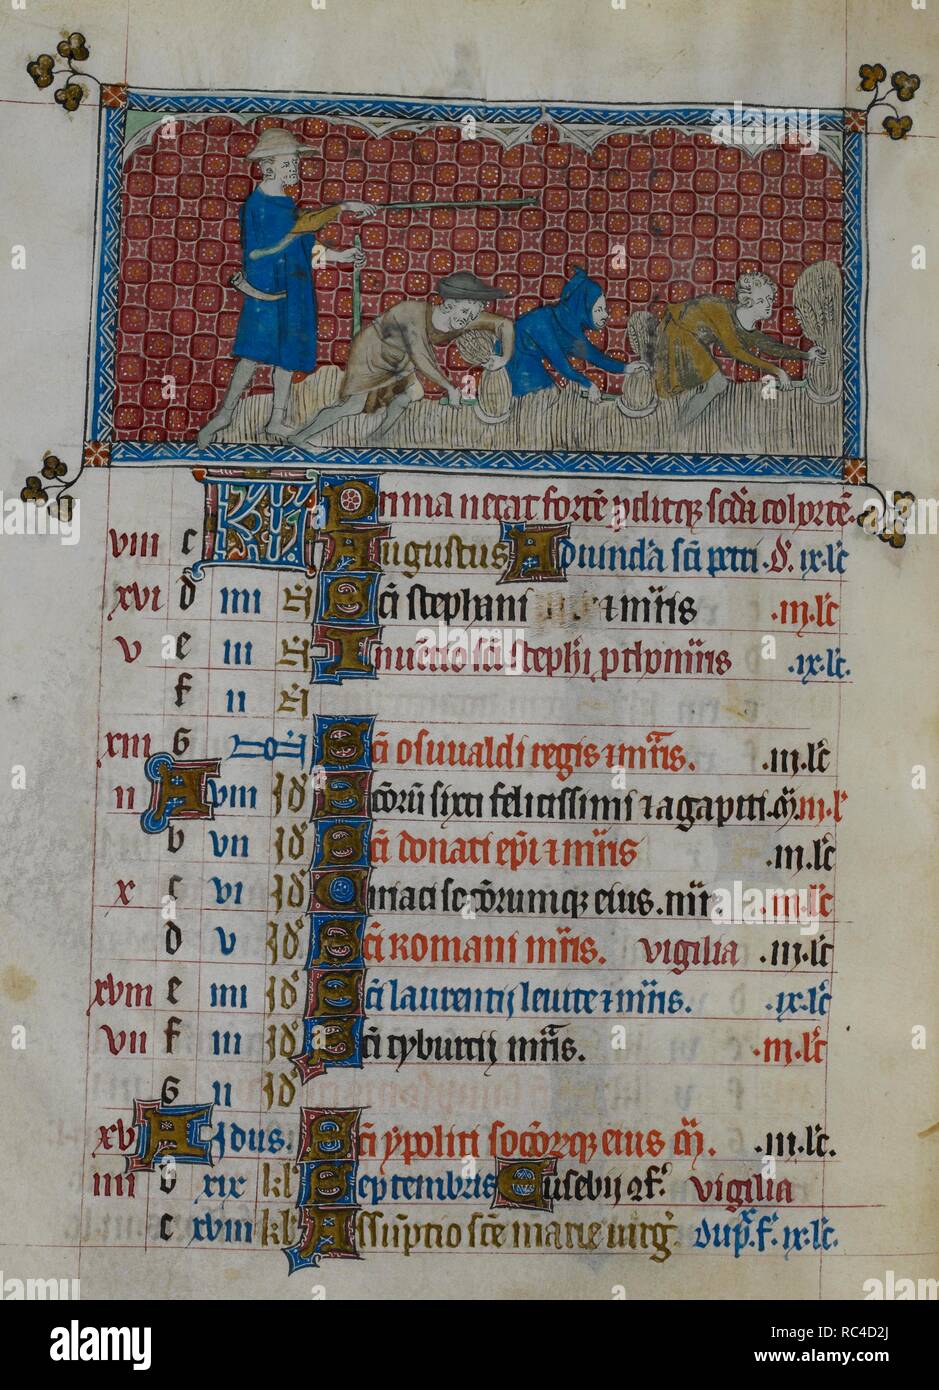 Calendar scene for August showing three men reaping, with a farmer directing them. Queen Mary Psalter. England (London?); circa 1310-1320. Source: Royal 2 B. VII, f.78v. Language: Latin. Stock Photo